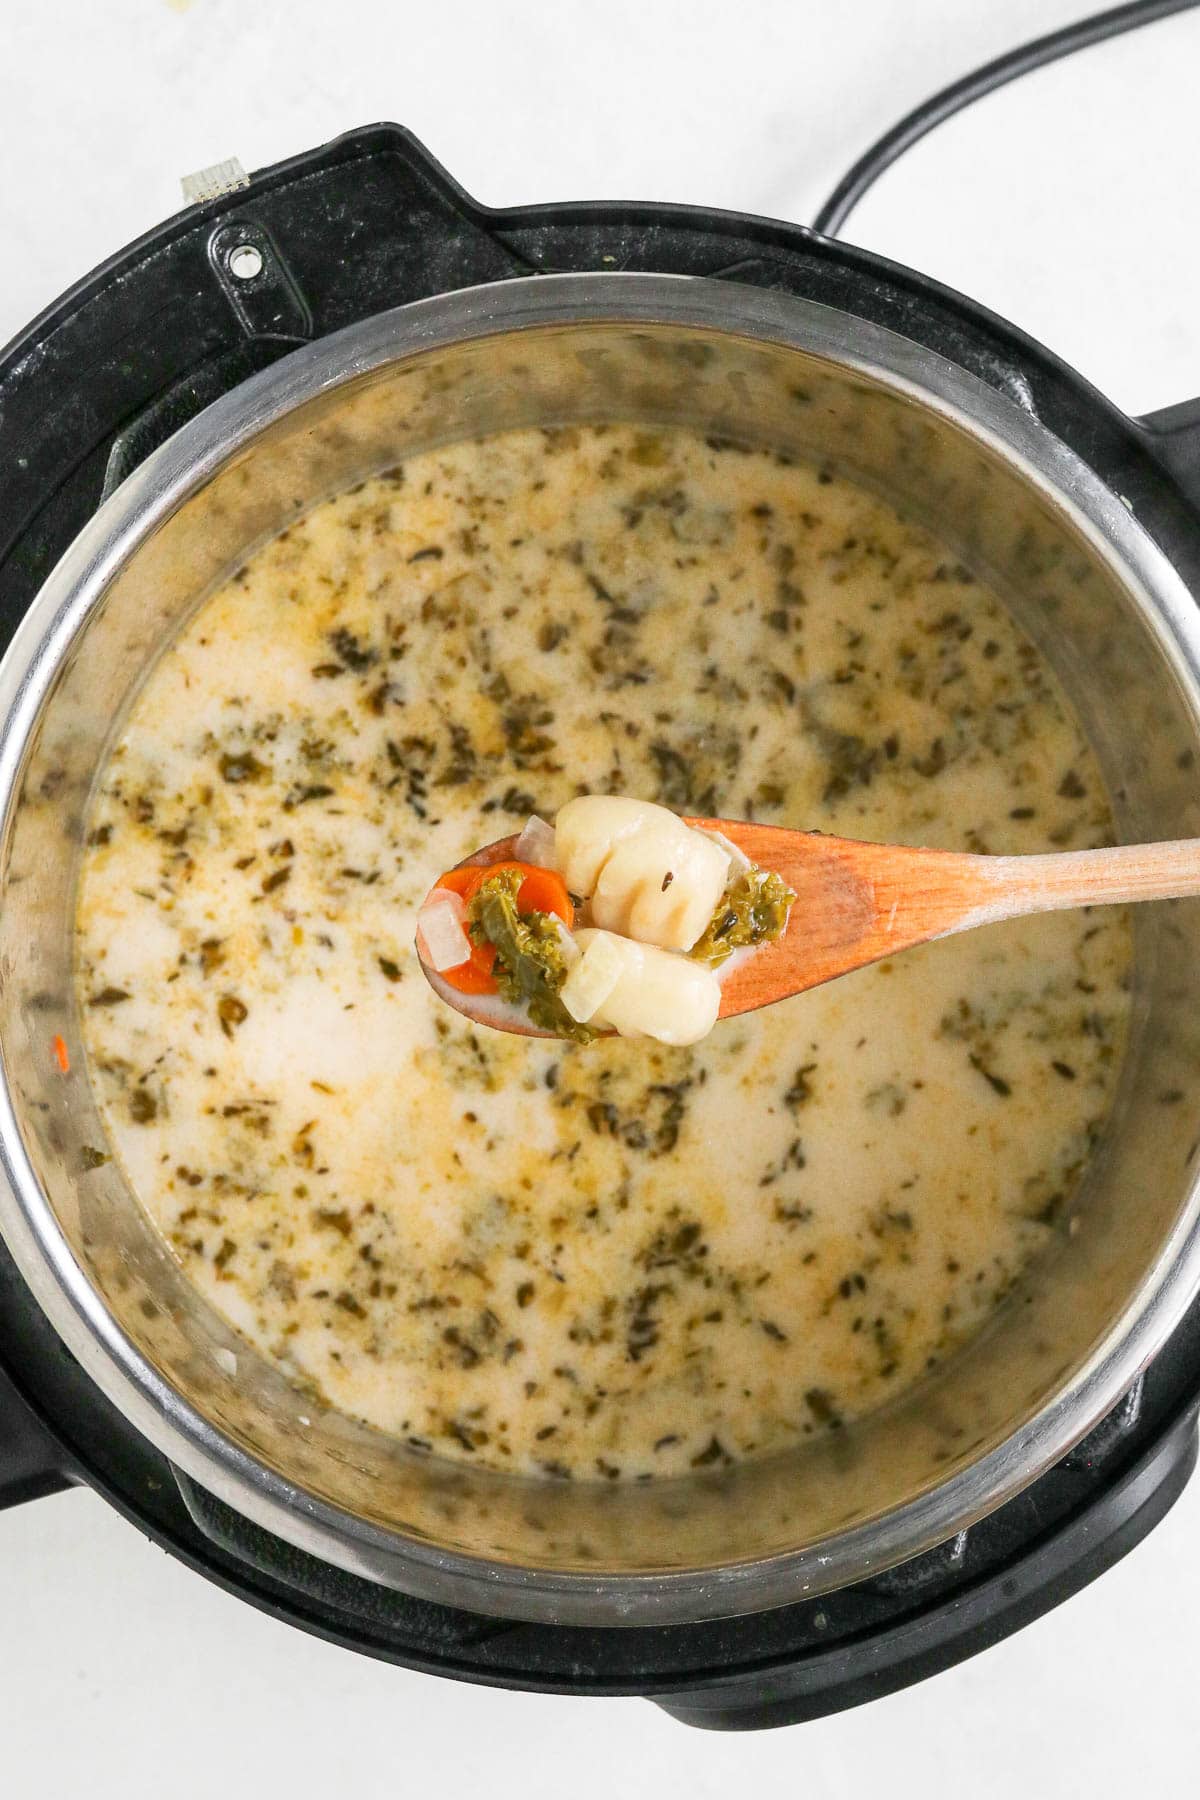 finished soup in the instant pot with wooden spoon holding gnocchi.